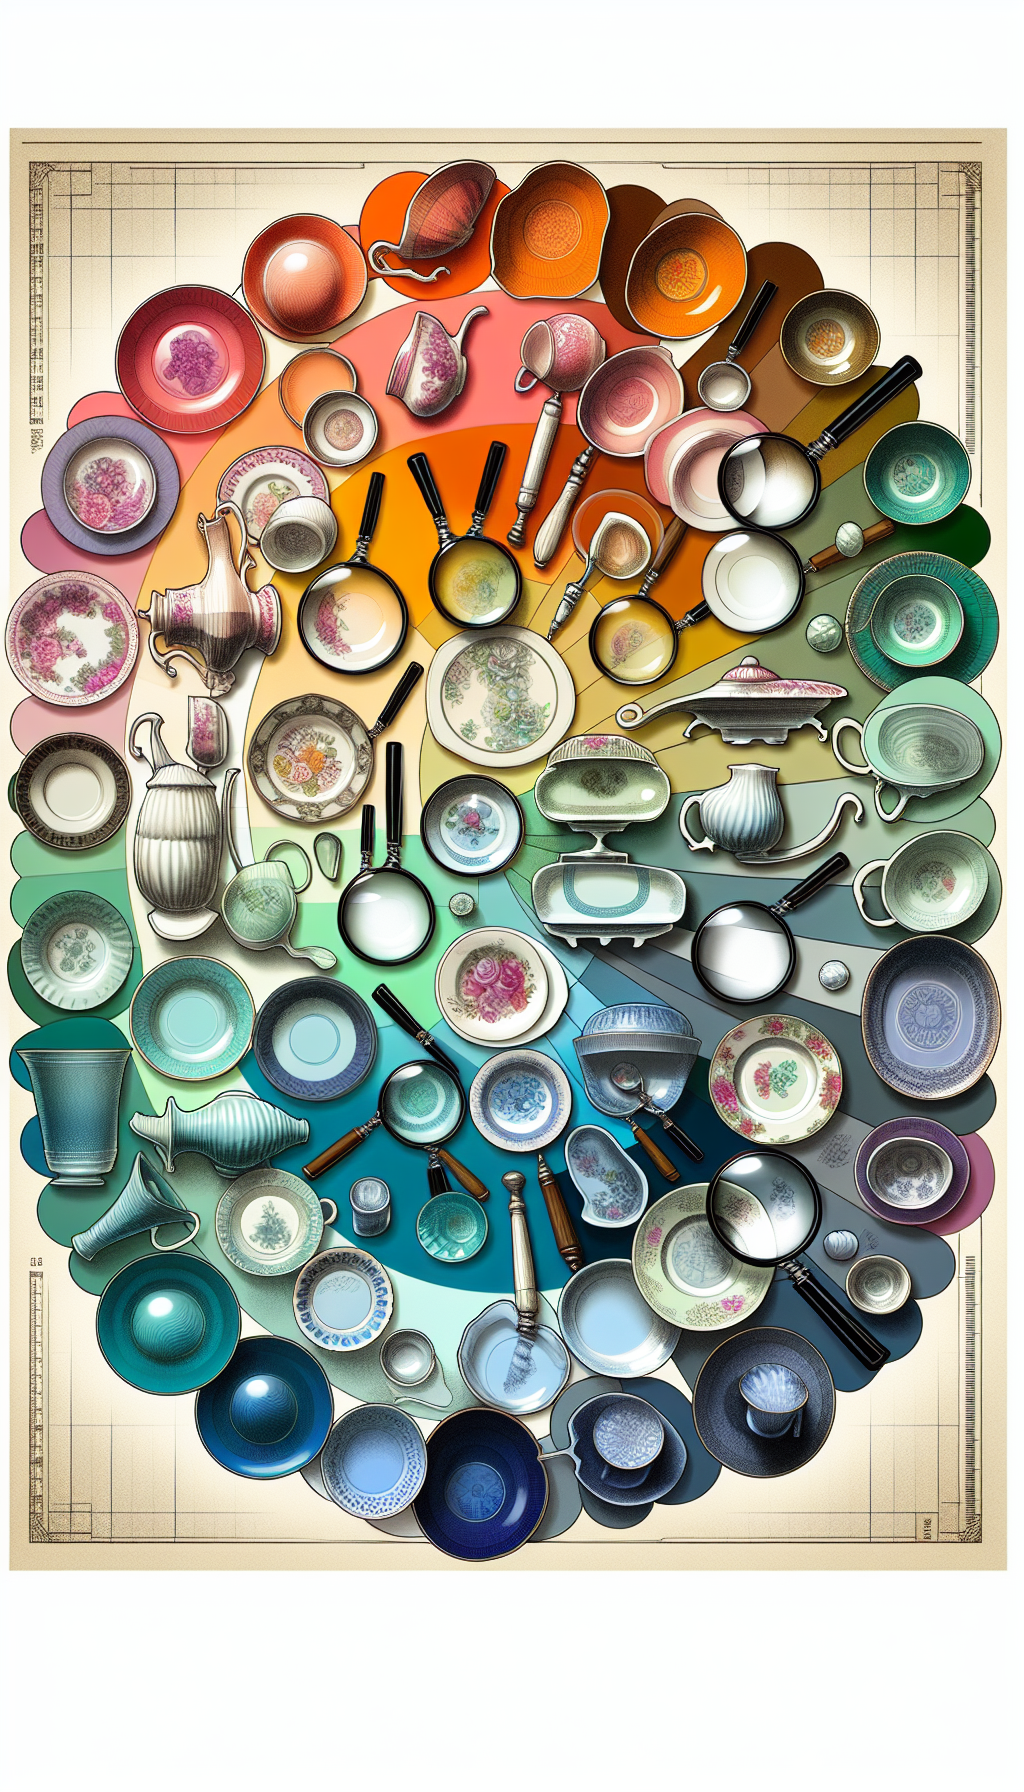 A vibrant montage of translucent vintage Fire-King dishware in an array of colors, fading from pastel tints to bold shades, artfully overlaid with translucent, sleuth-like magnifying glasses scrutinizing rare patterns. The finishes are textured within the illustration: opalescent for Pearl Luster, matte for Jadeite, and glossy for Azurite. The dishware forms an arc, creating a chromatic encyclopedia of Fire-King's history.